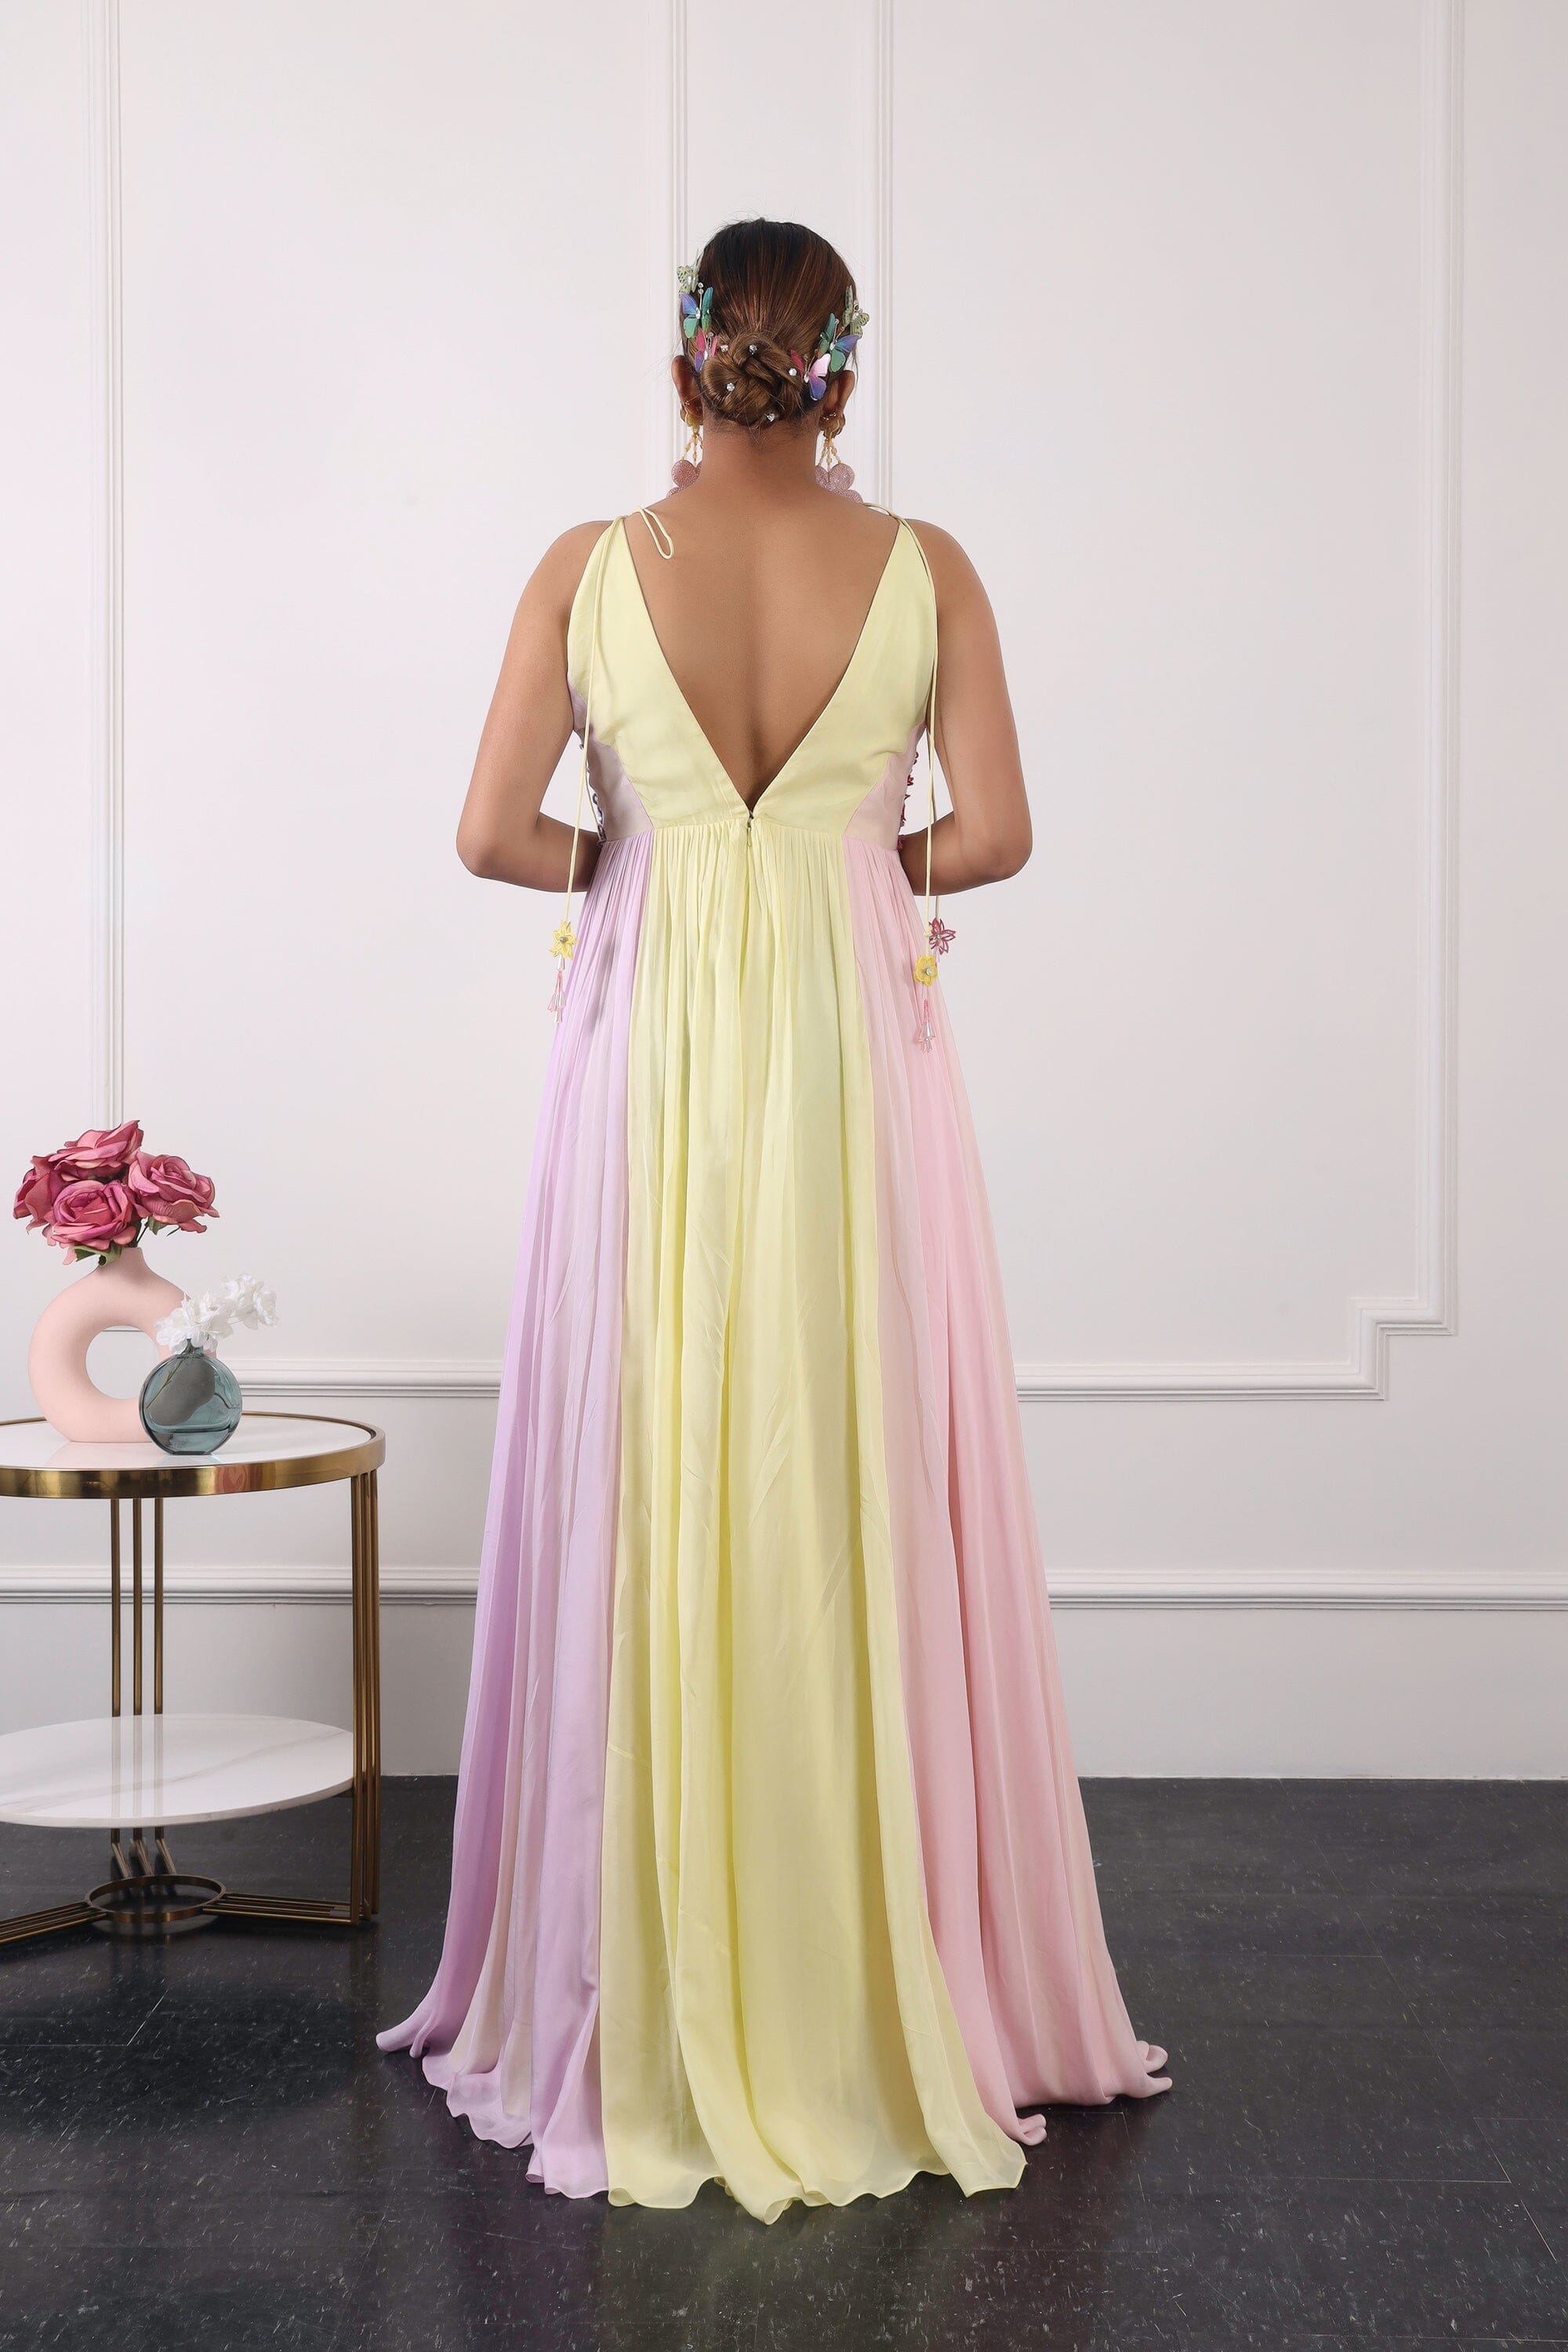 34 Pastel Bridesmaid Dresses Perfect for Warm Weddings